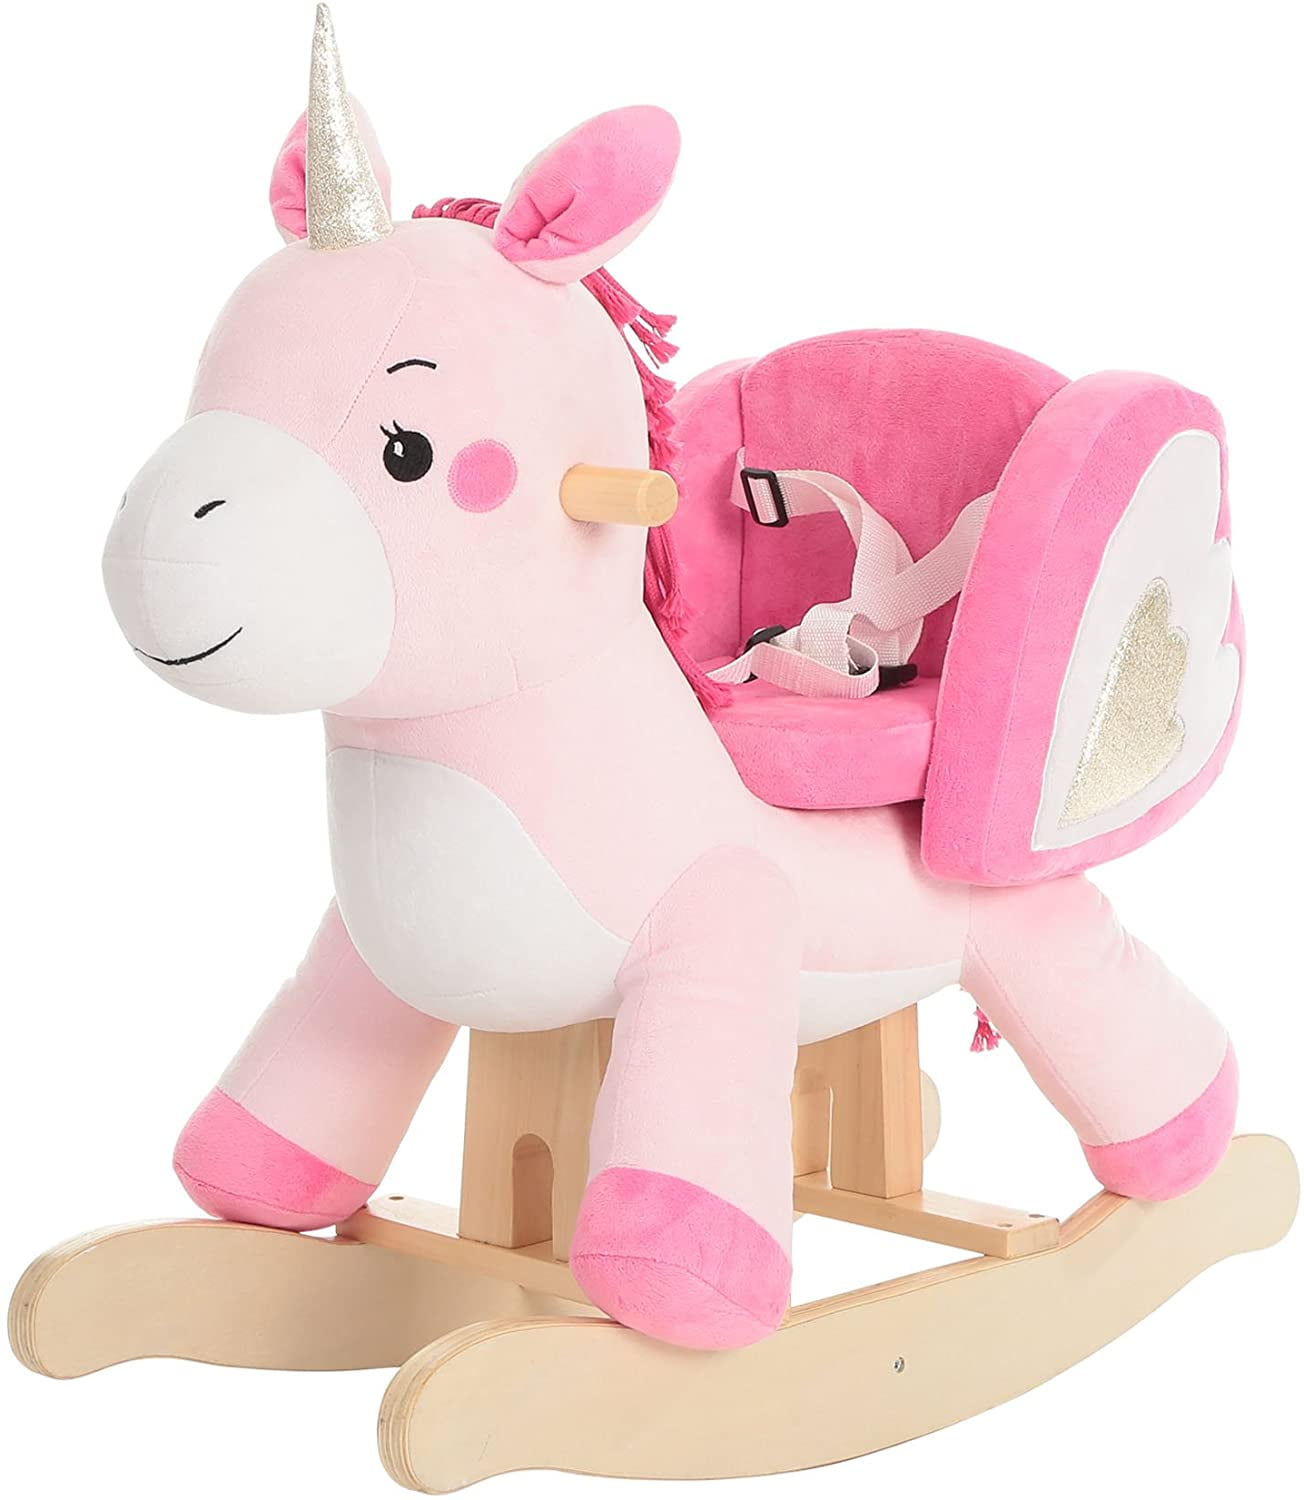 Rocking Horse for Toddlers Baby 1-3 Years Old Kids Rocker Seat Ride On Toy Pink 